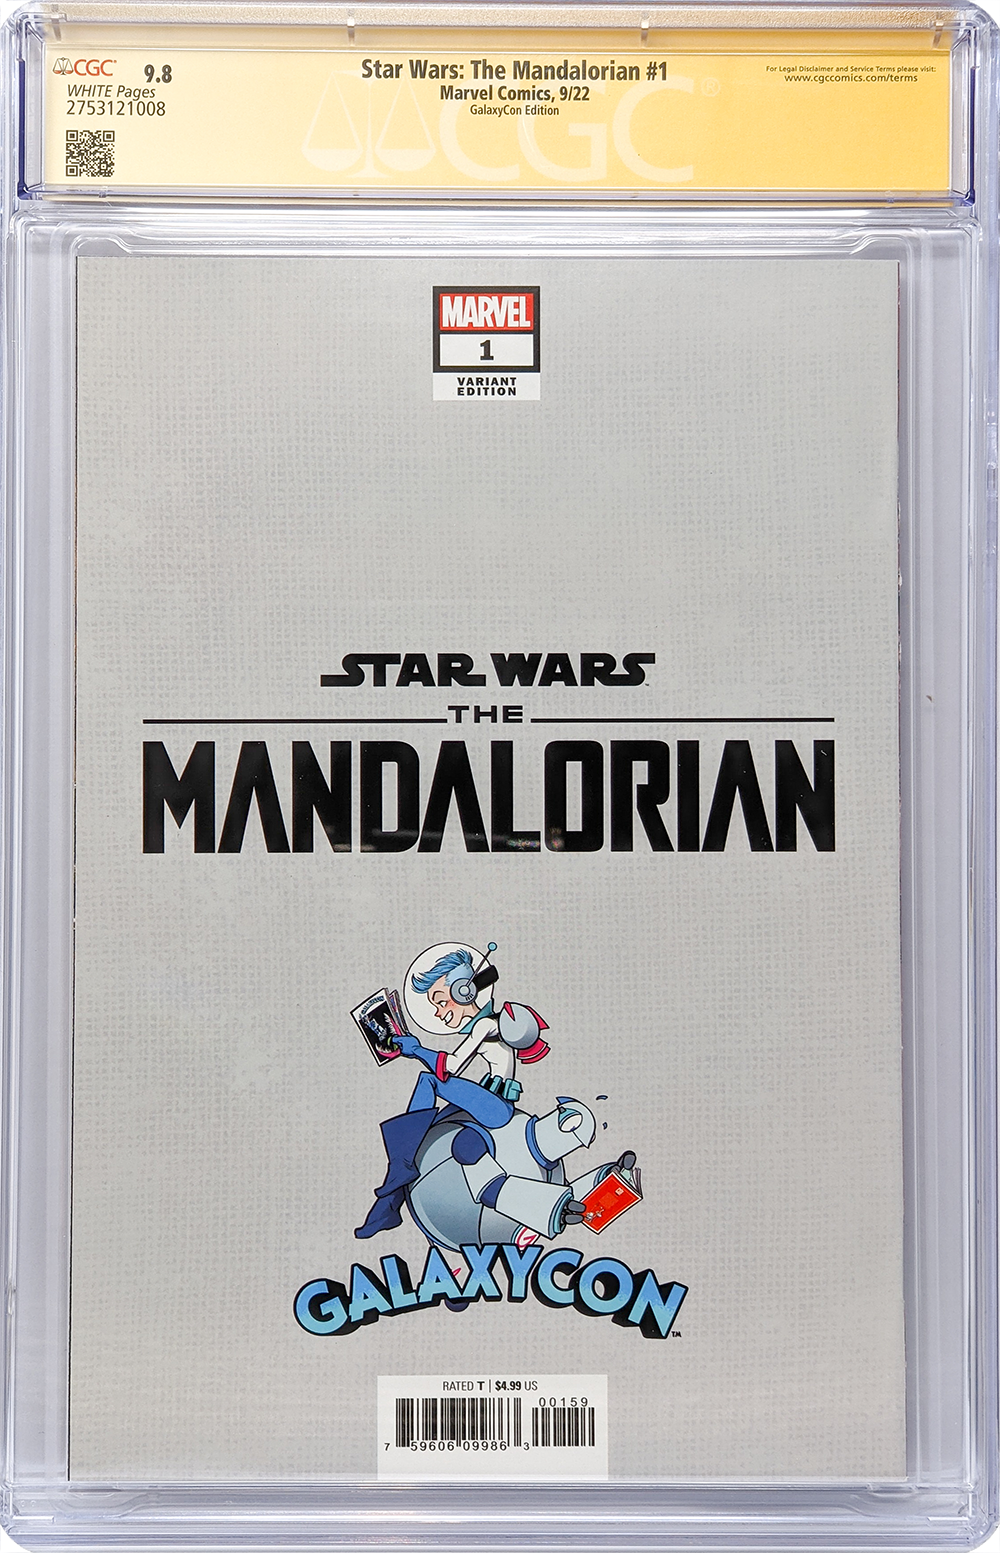 Star Wars: The Mandalorian #1 GalaxyCon Raleigh 2022 Exclusive Variant CGC Signature Series 9.8 Signed Barnes & Jeanty GalaxyCon